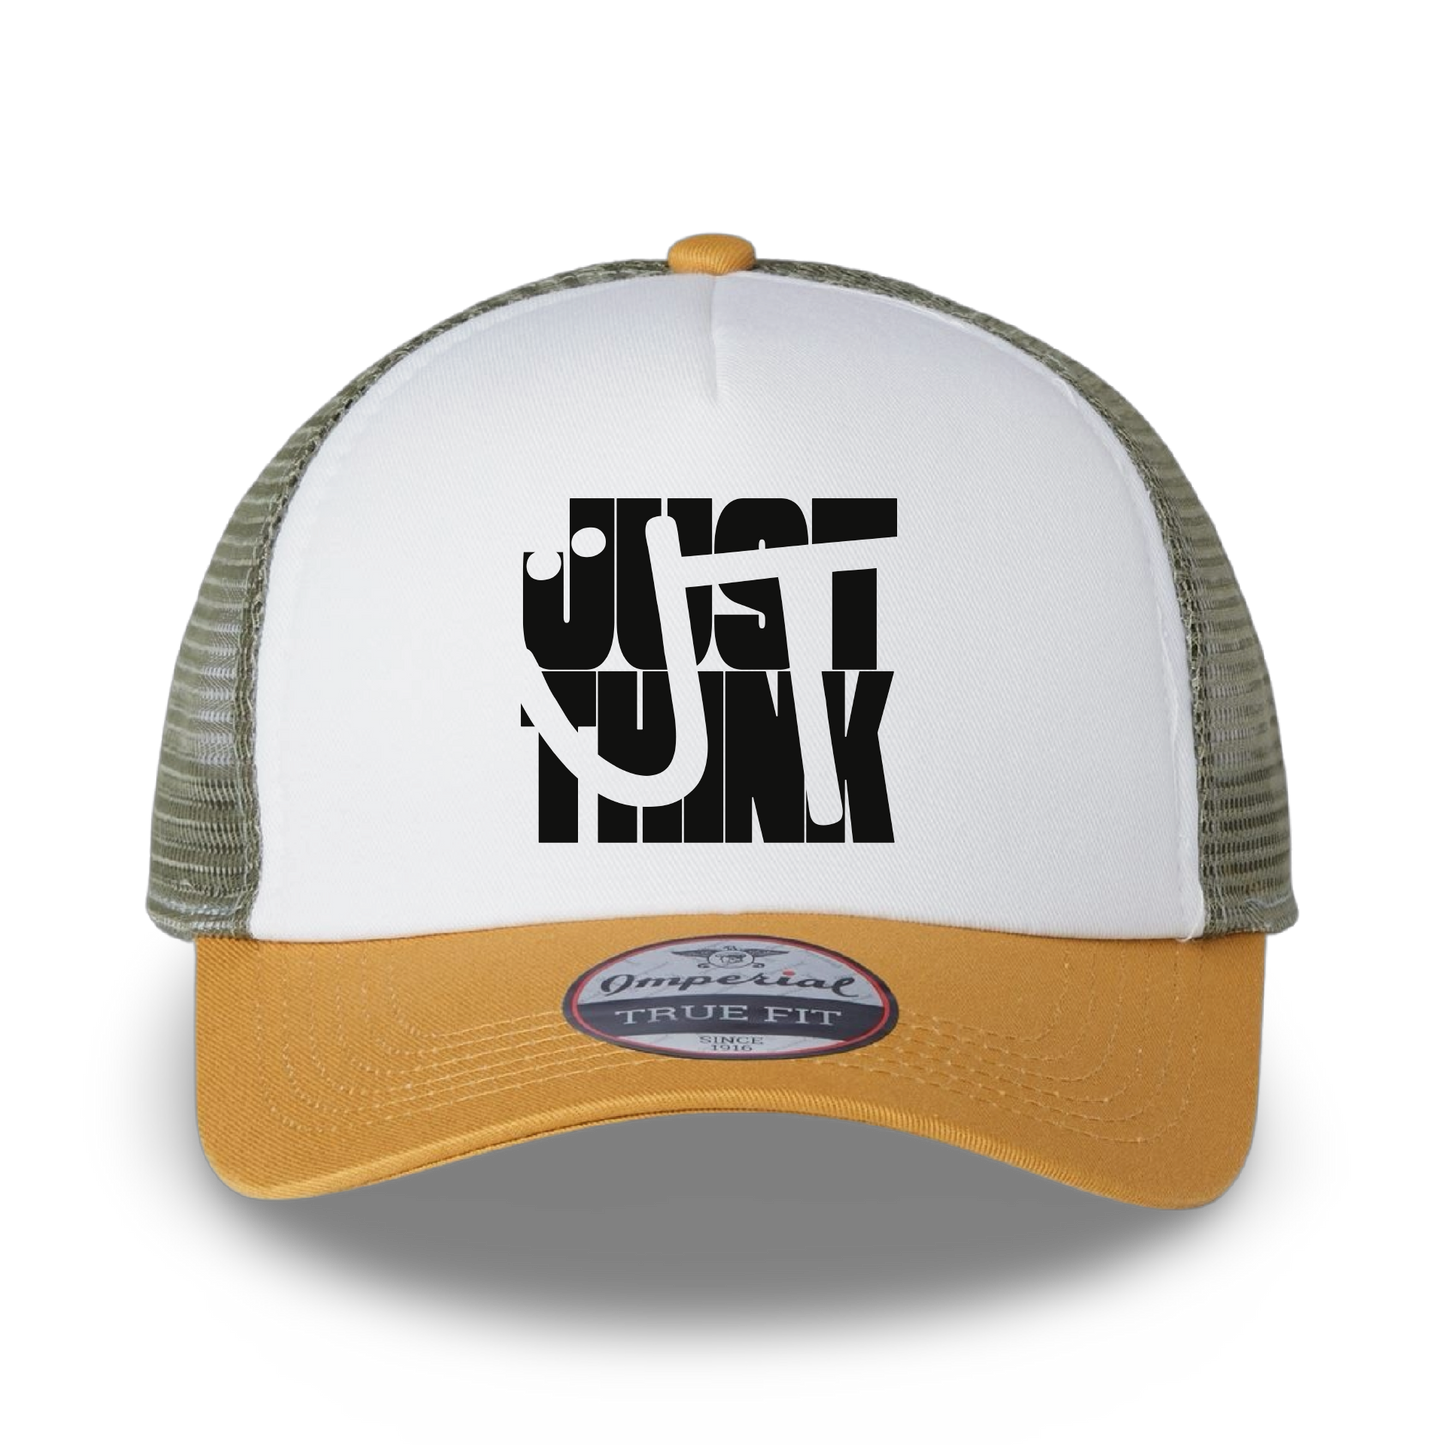 The Mashup (Trucker Hat x Imperial)